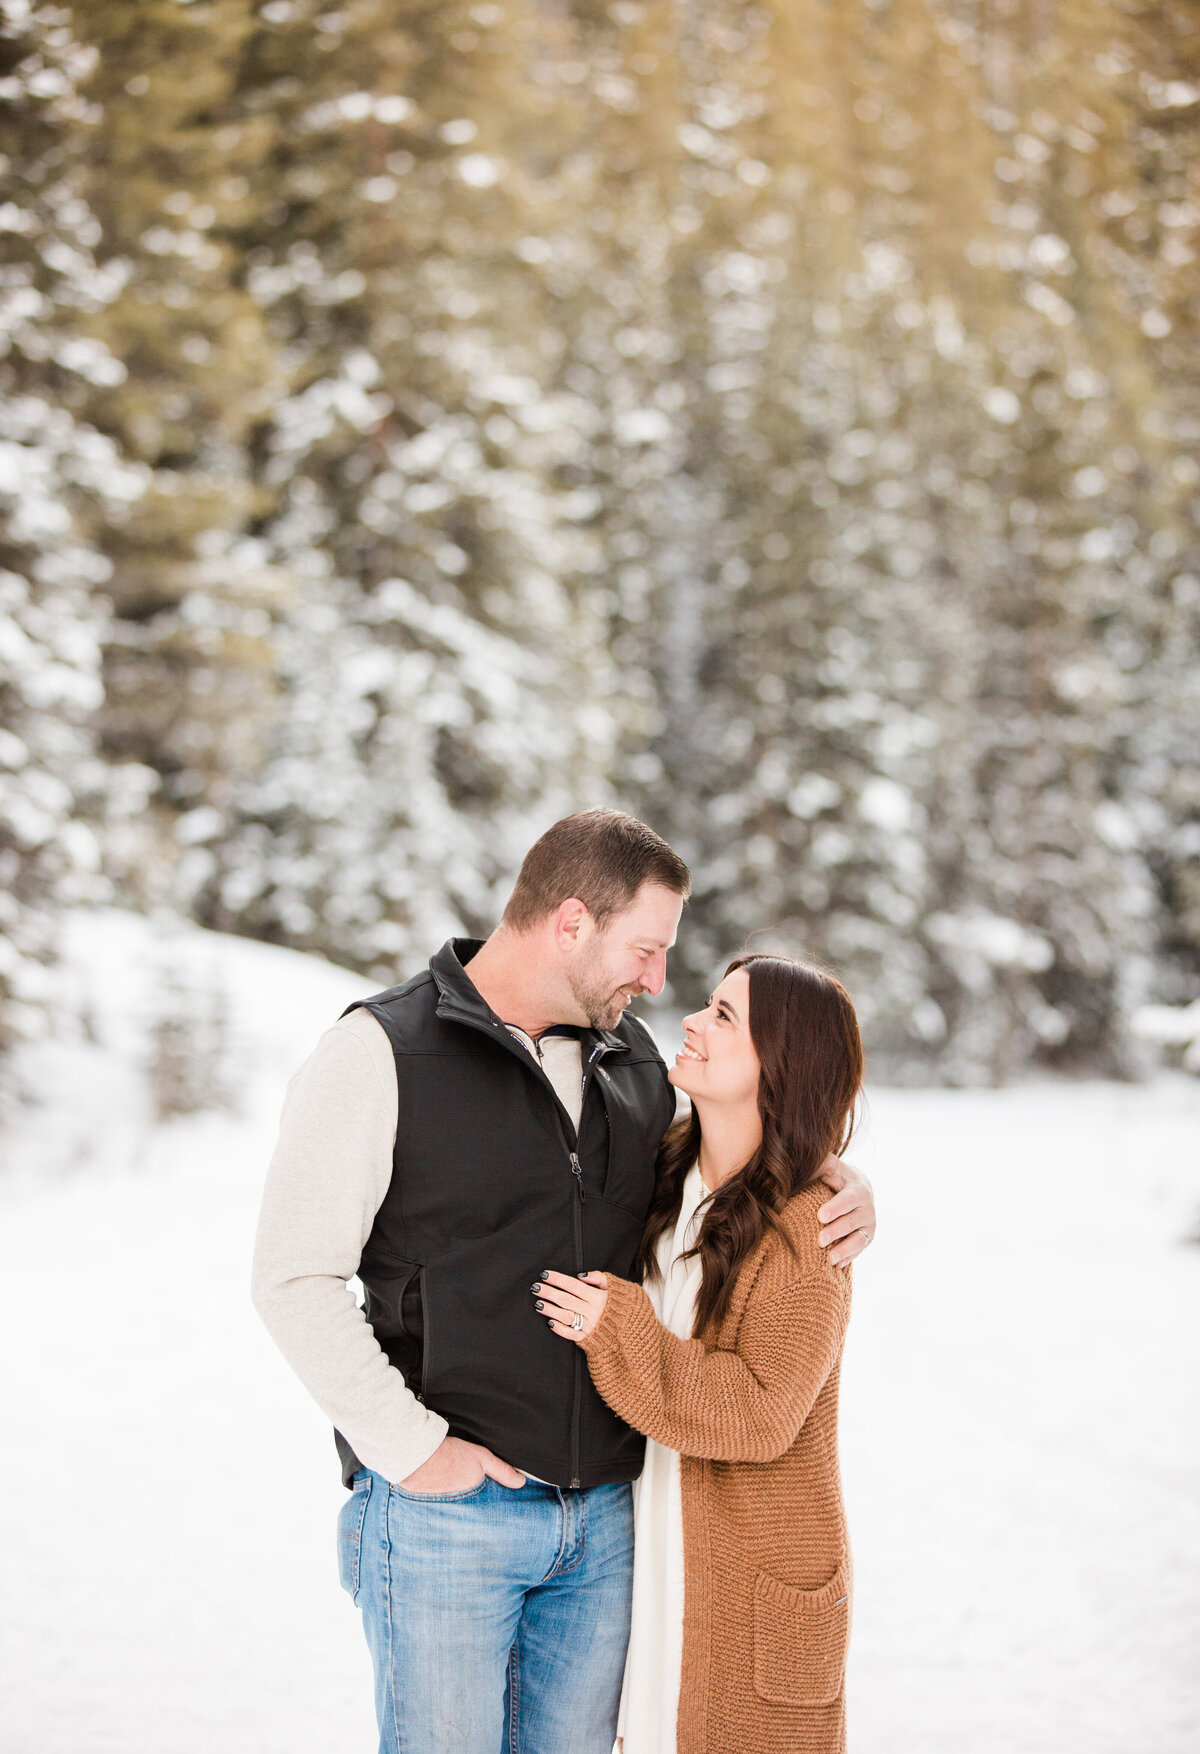 A man and woman are standing closely together looking at each other. They are in a winter scene of pine trees and snow all around